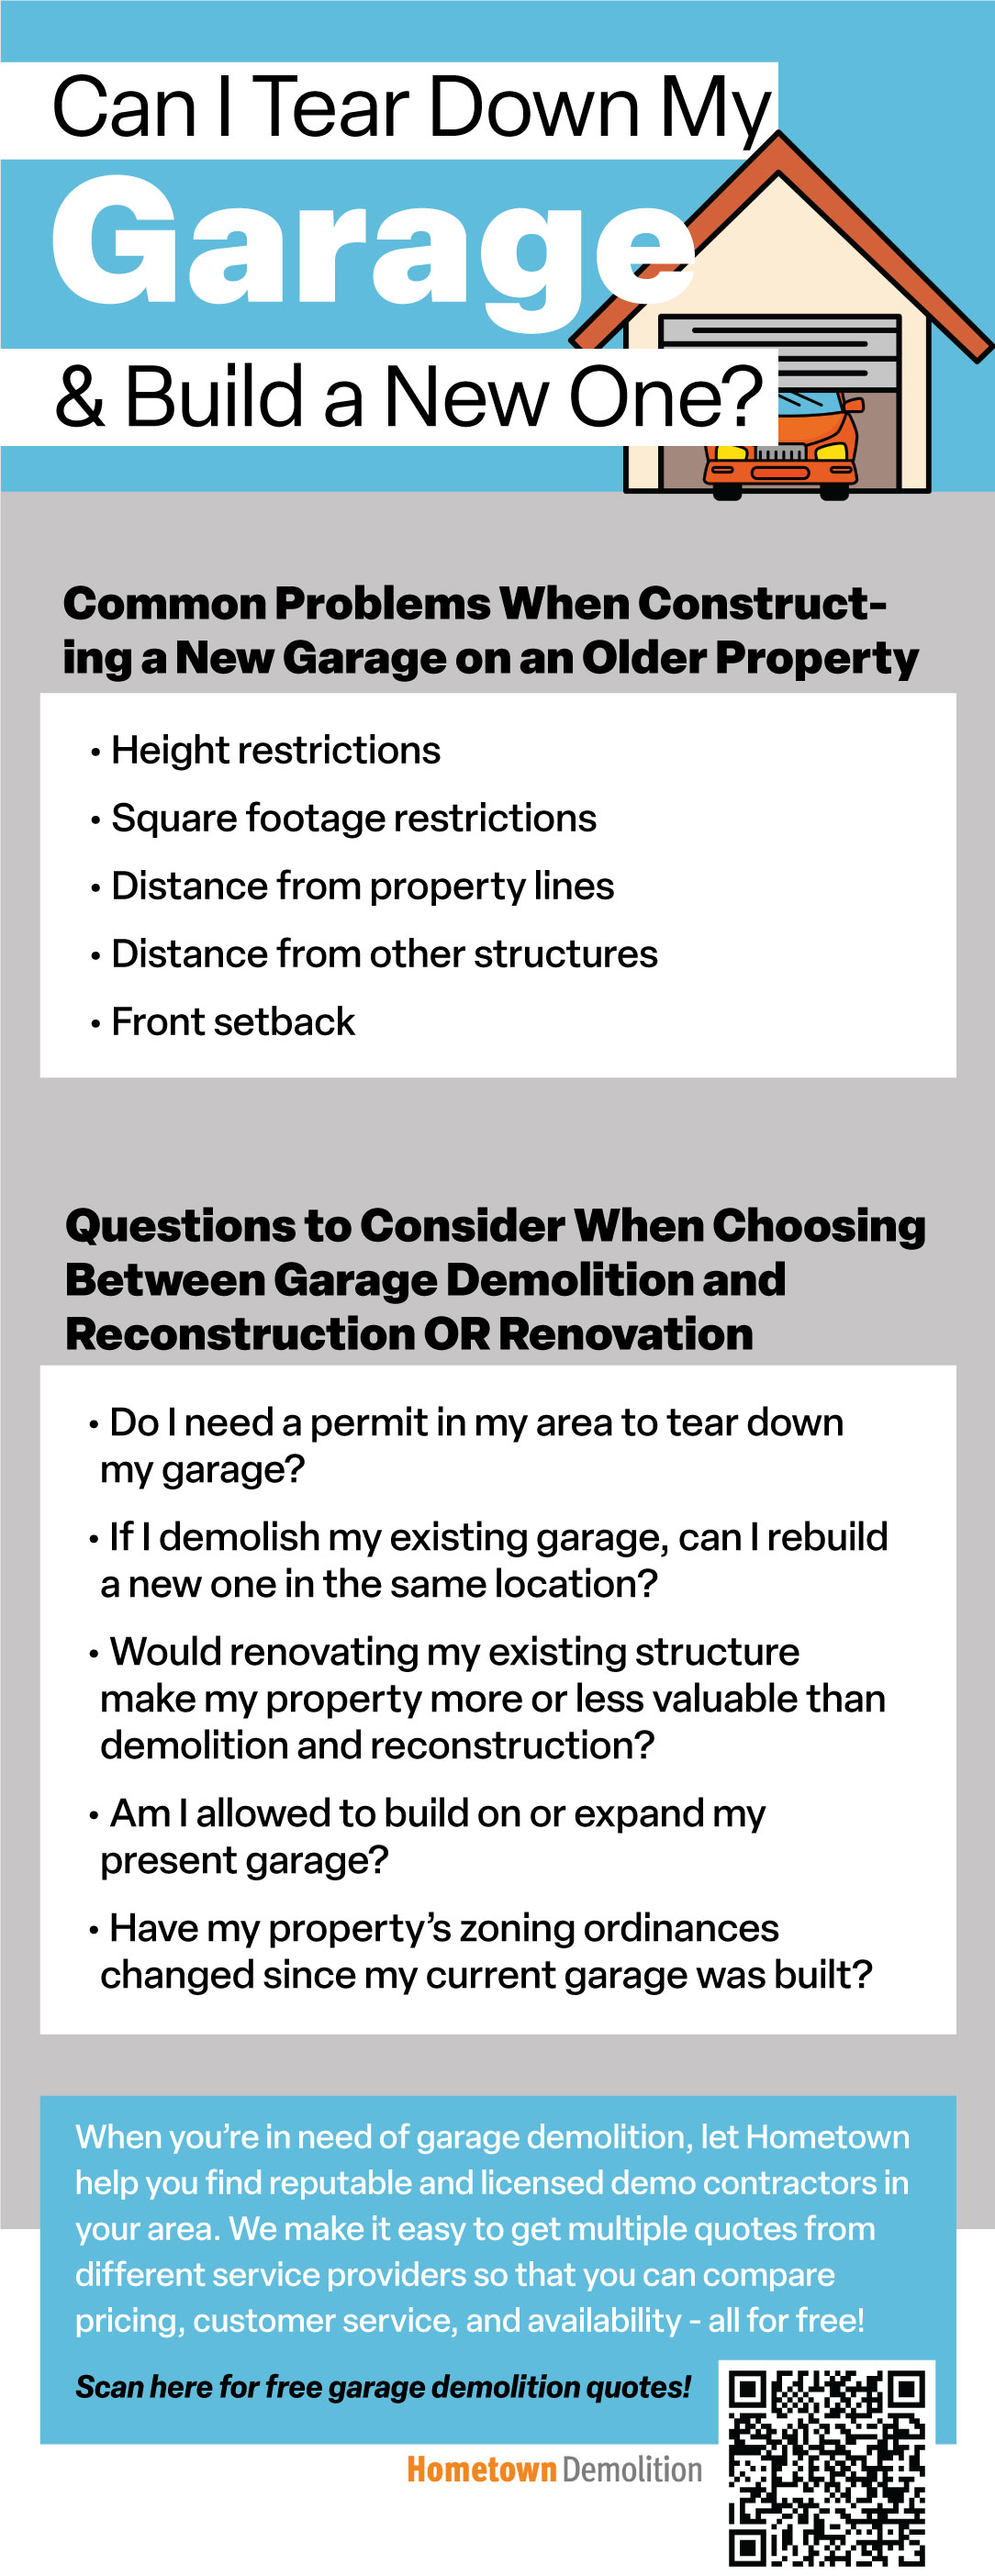 Can I Tear Down My Old Garage and Build a New One? infographic